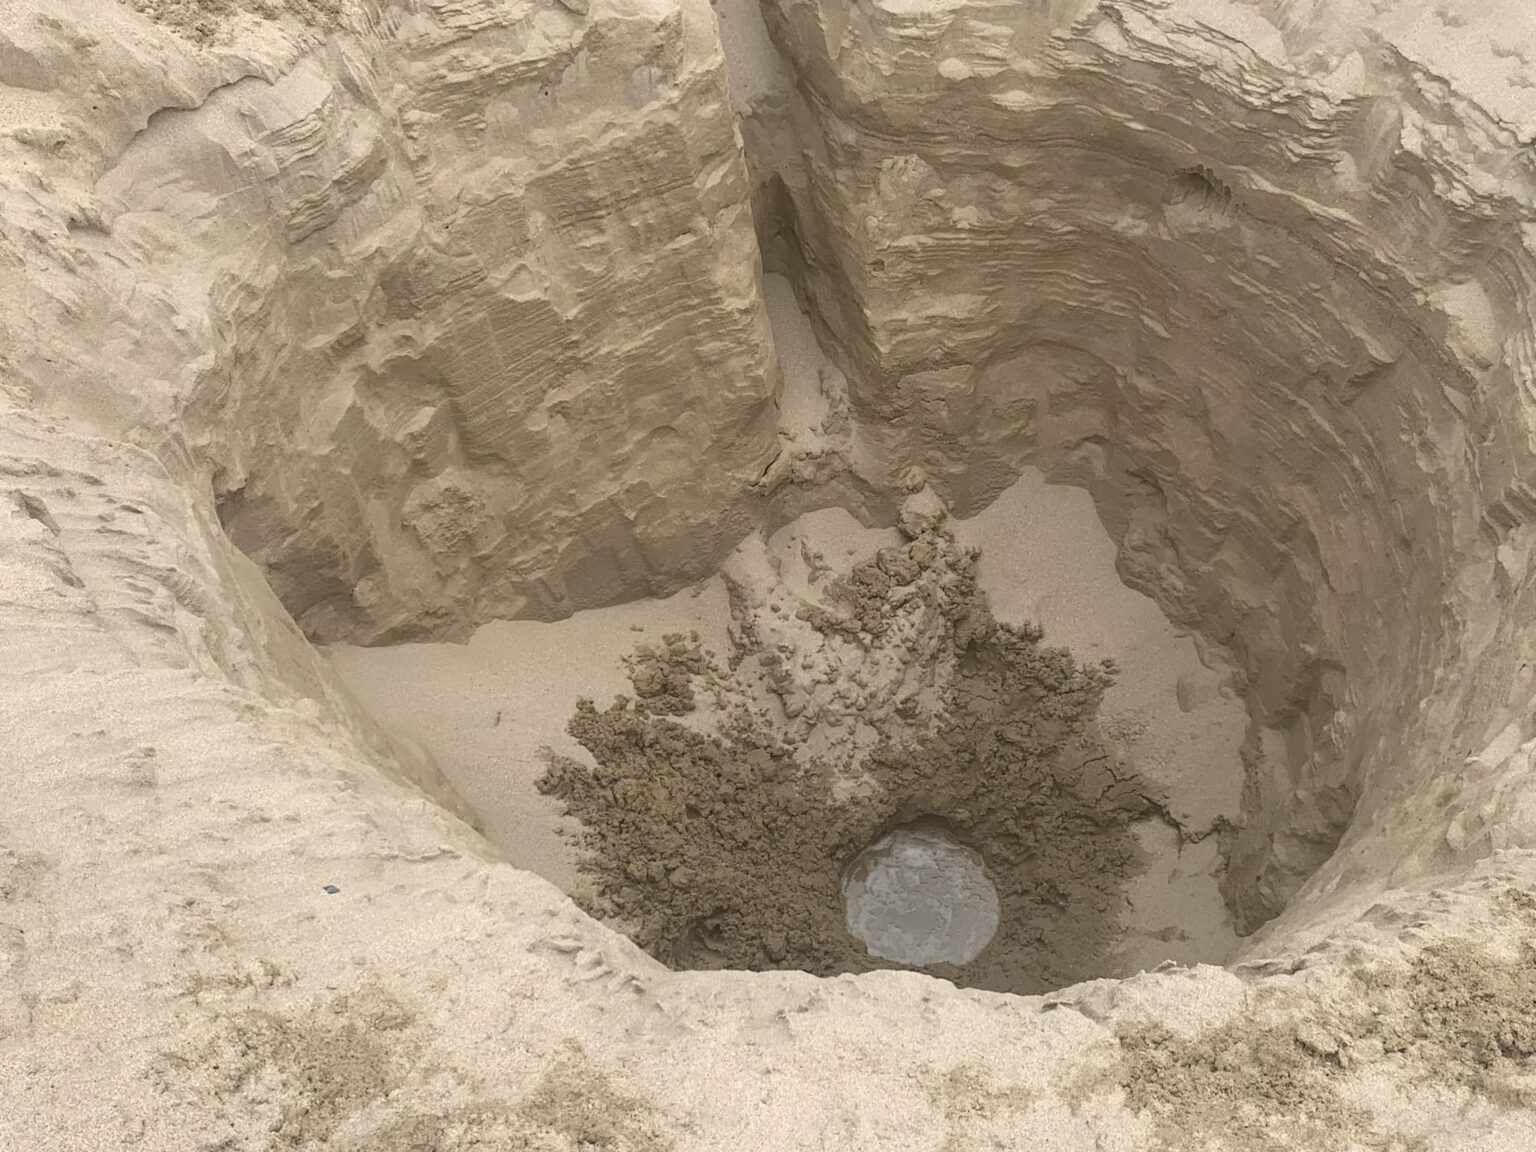 Fears for kids' safety as an 8ft deep hole is found on Tregirls beach, Cornwall. Locals alarmed; HM Coastguard warns of danger. Hole filled by digger to prevent accidents.